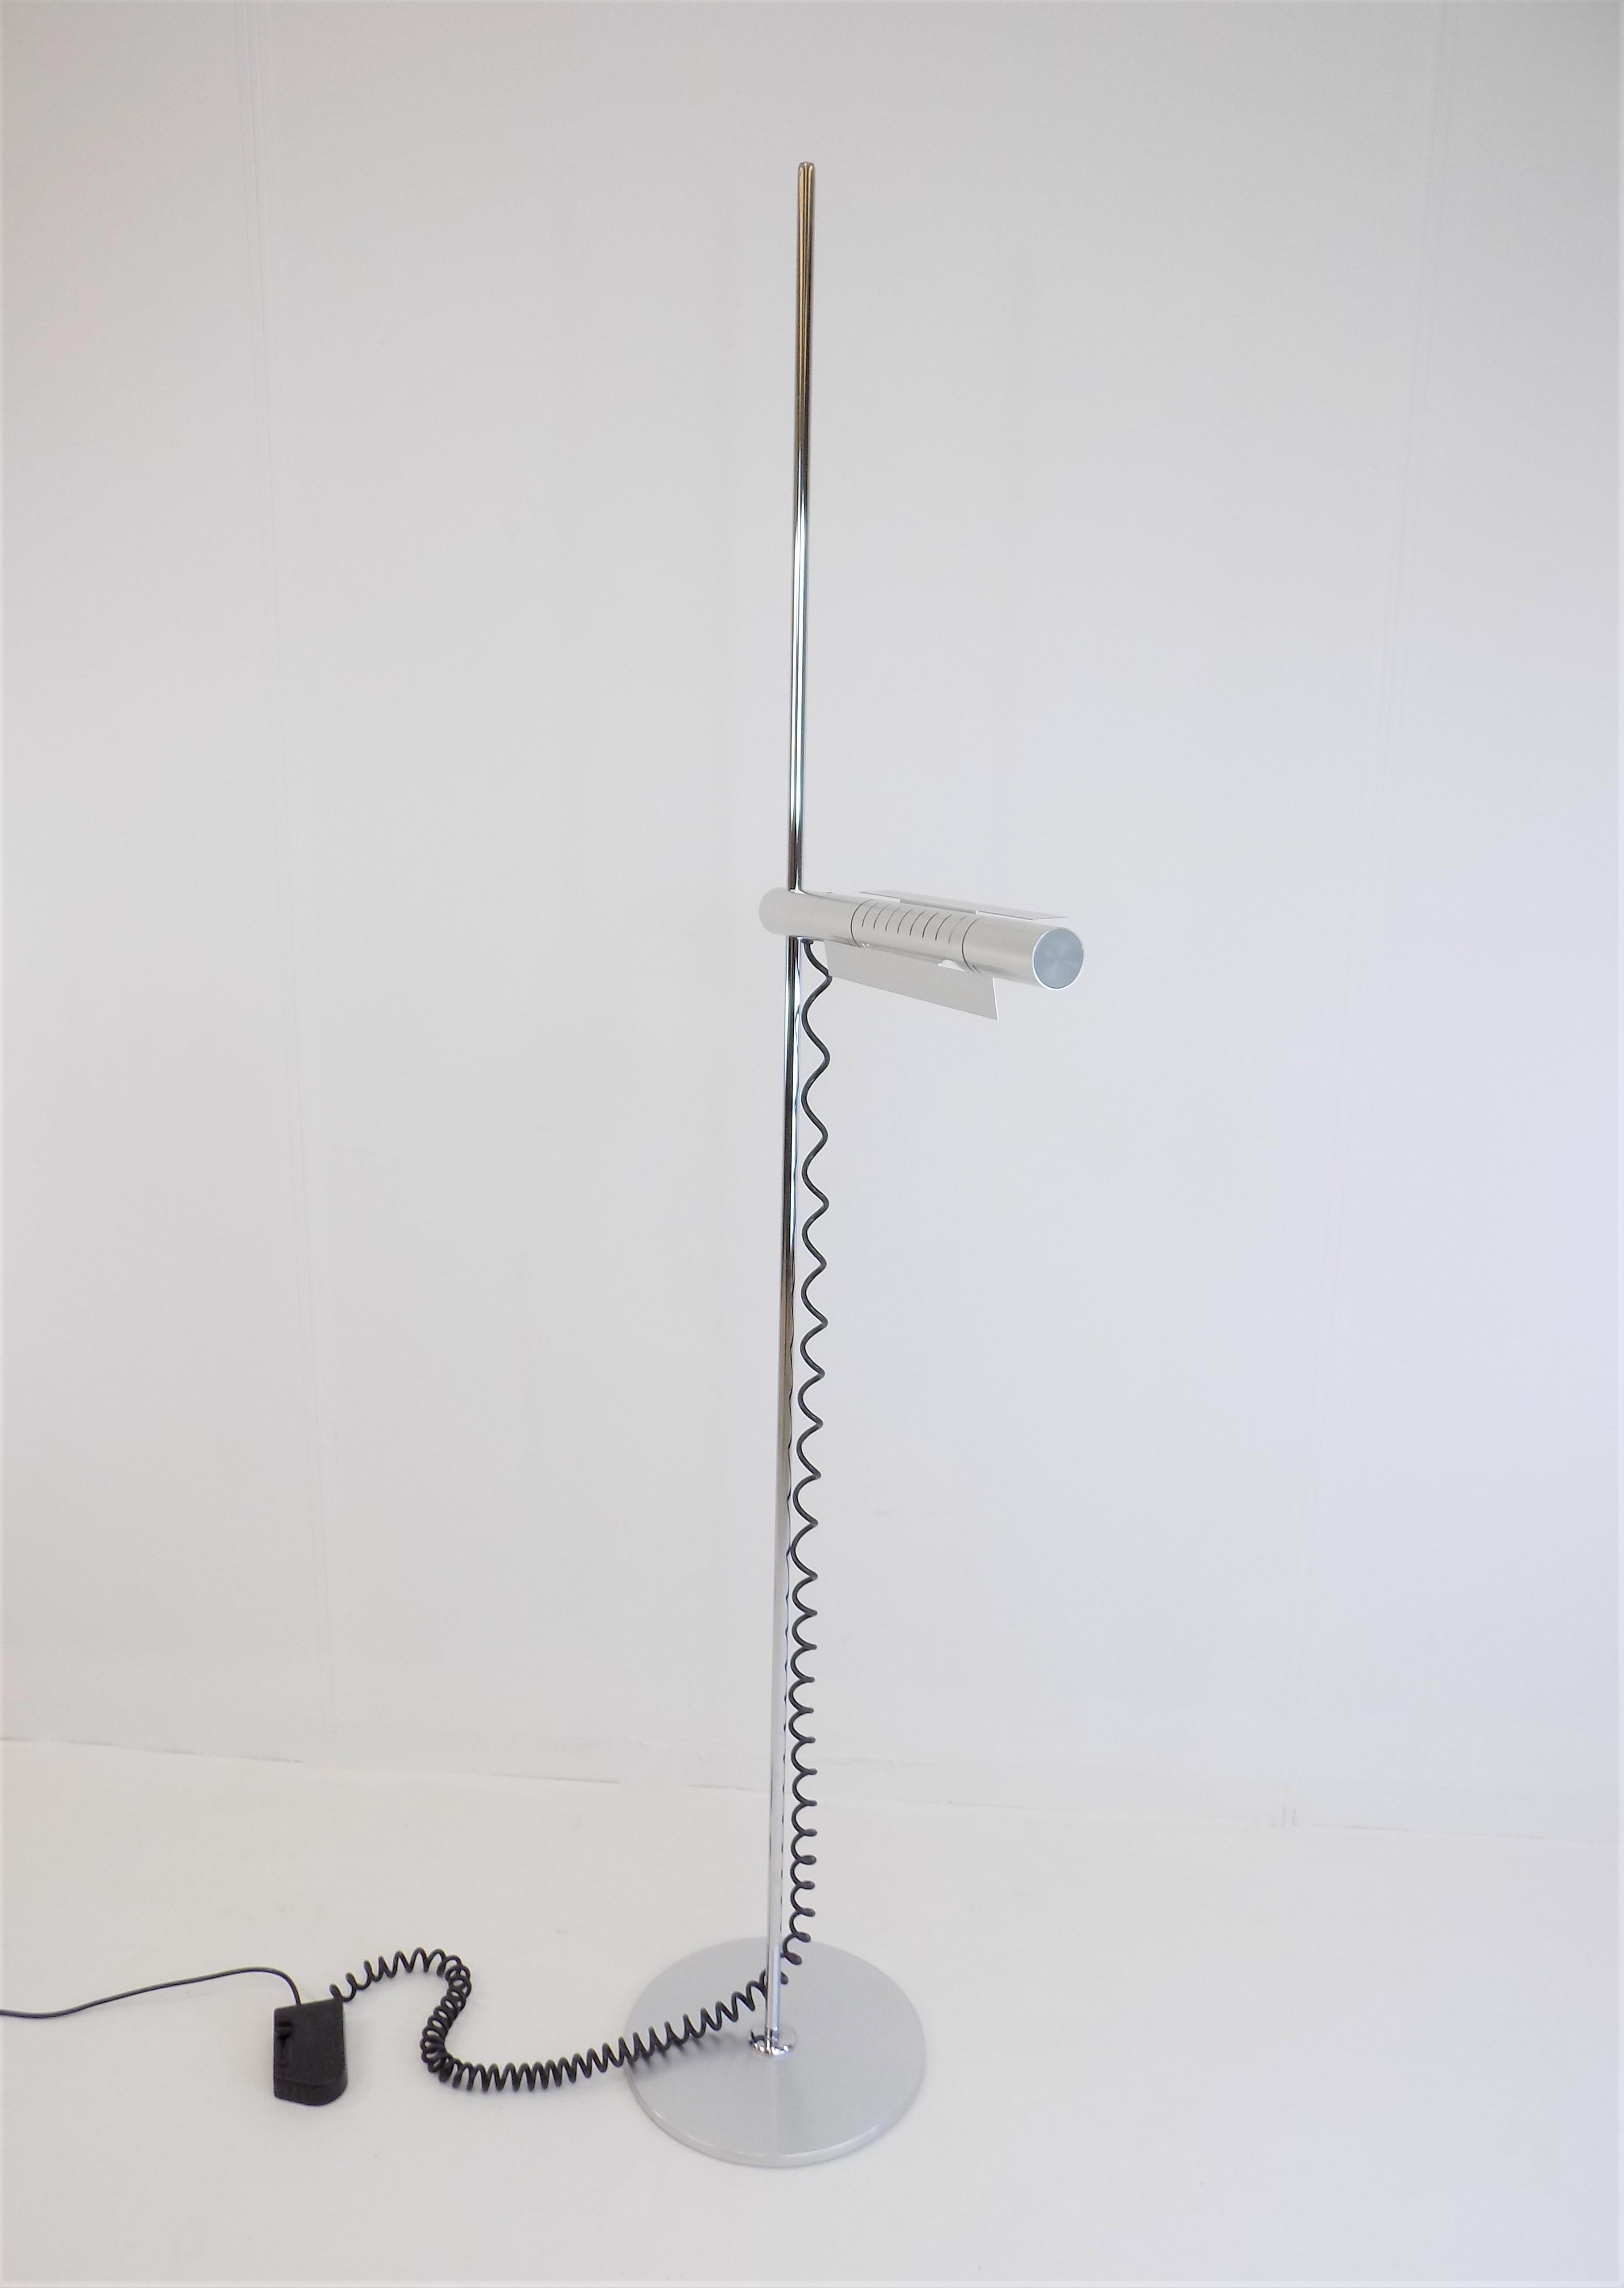 Swisslamps International Halo 250 Floor Lamp by R. and R. Baltensweiler For Sale 3